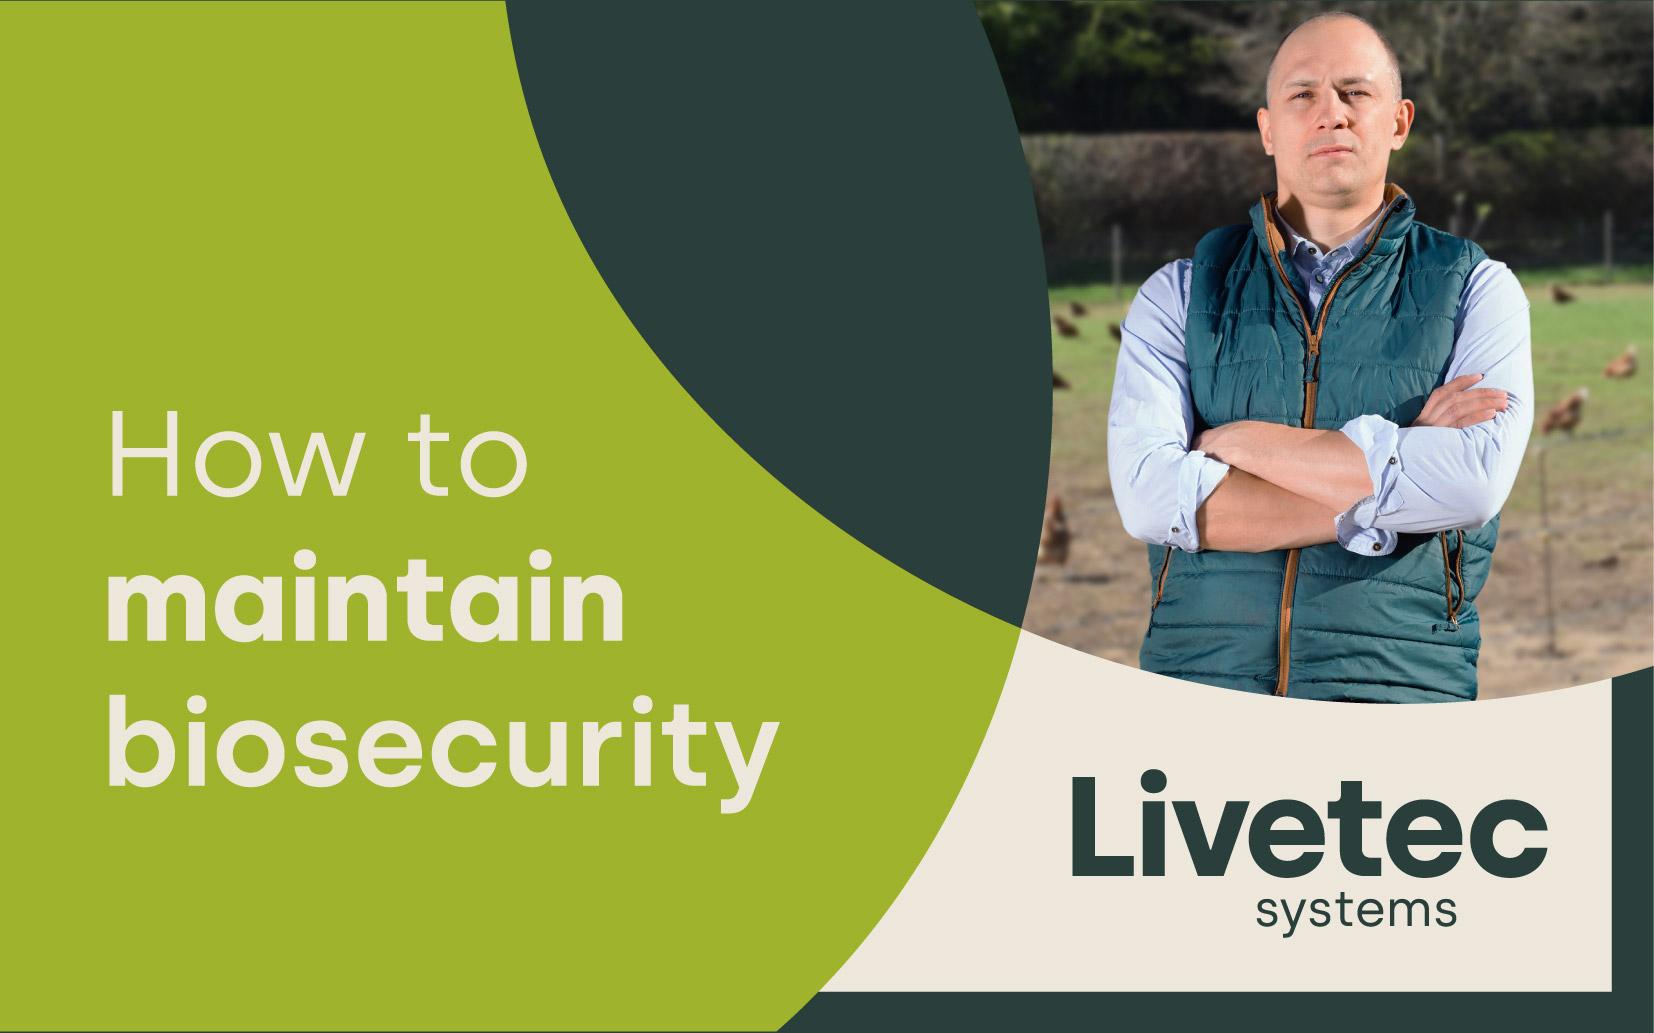 How to maintain biosecurity